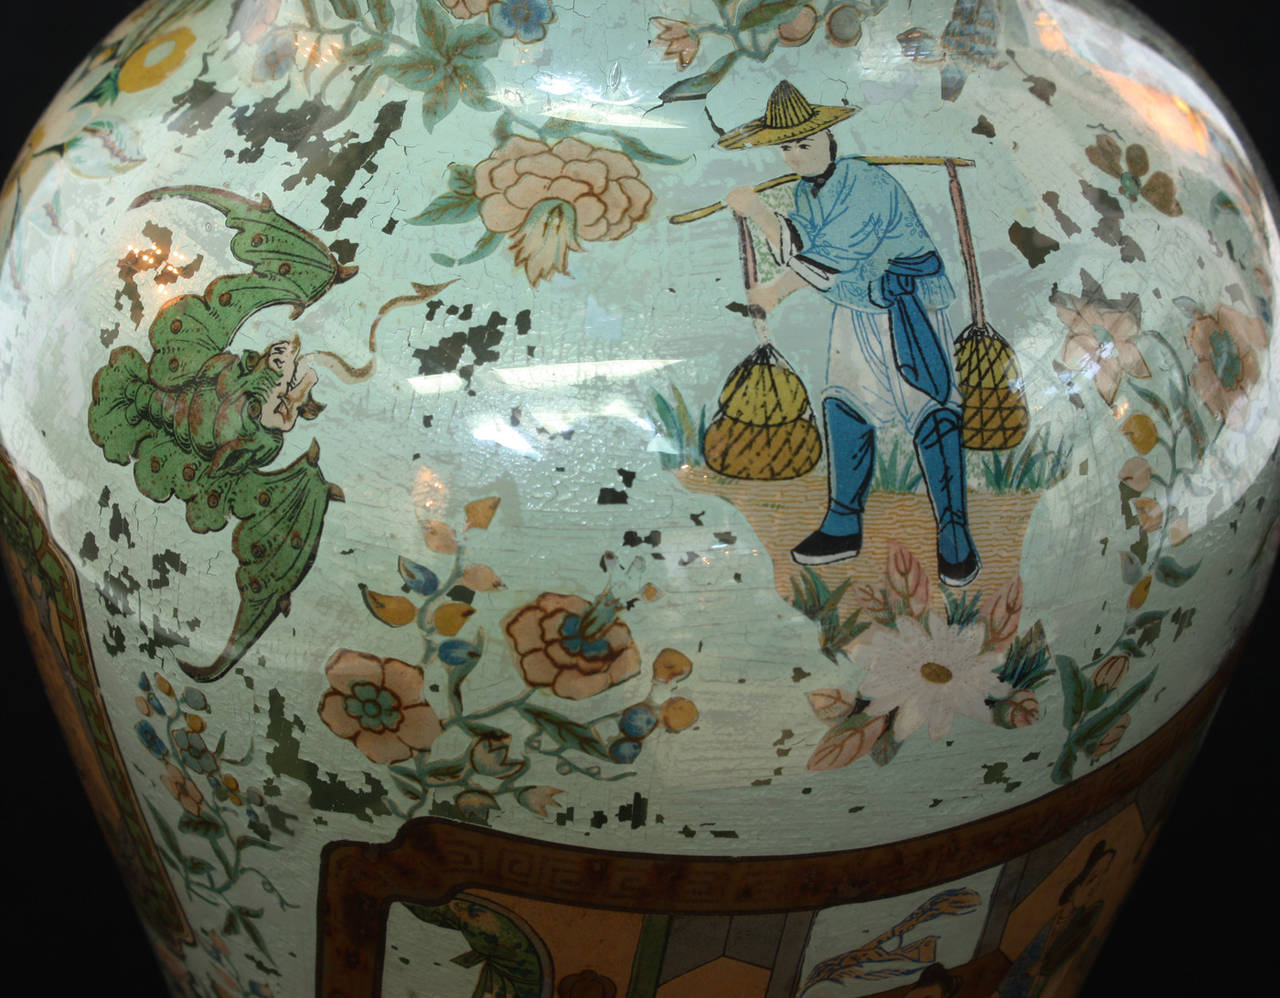 A Single Chinese Decalcomania Glass Vase Decorated with Chinese figures, Bats, Flowers and Birds.  

Cartouche framed scenes on each side of vase body, each depicting a different detailed and elaborate scene, against a celedon ground. Now mounted